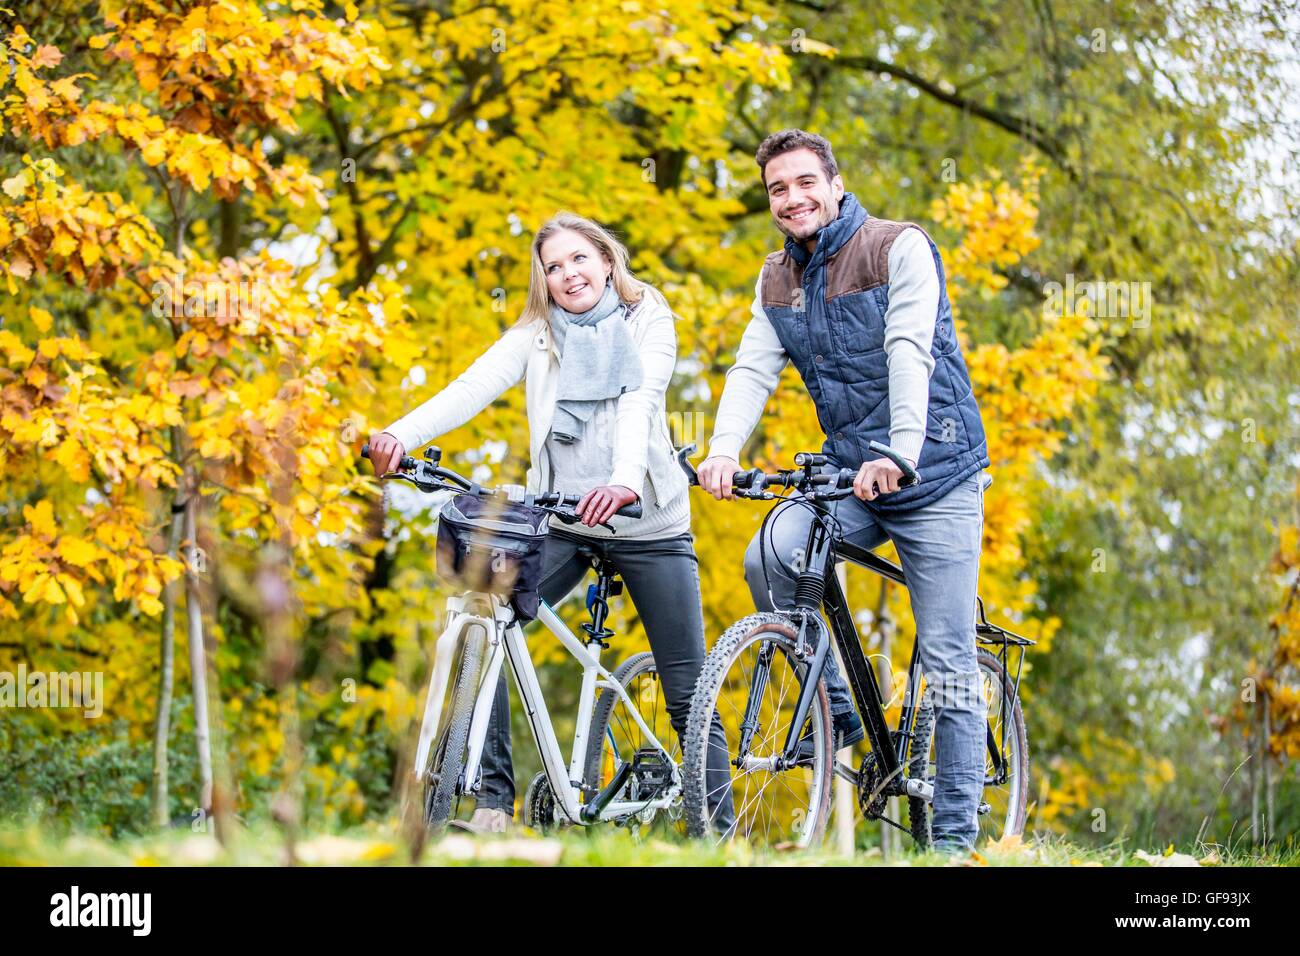 MODEL RELEASED. Young couple cycling together. Stock Photo